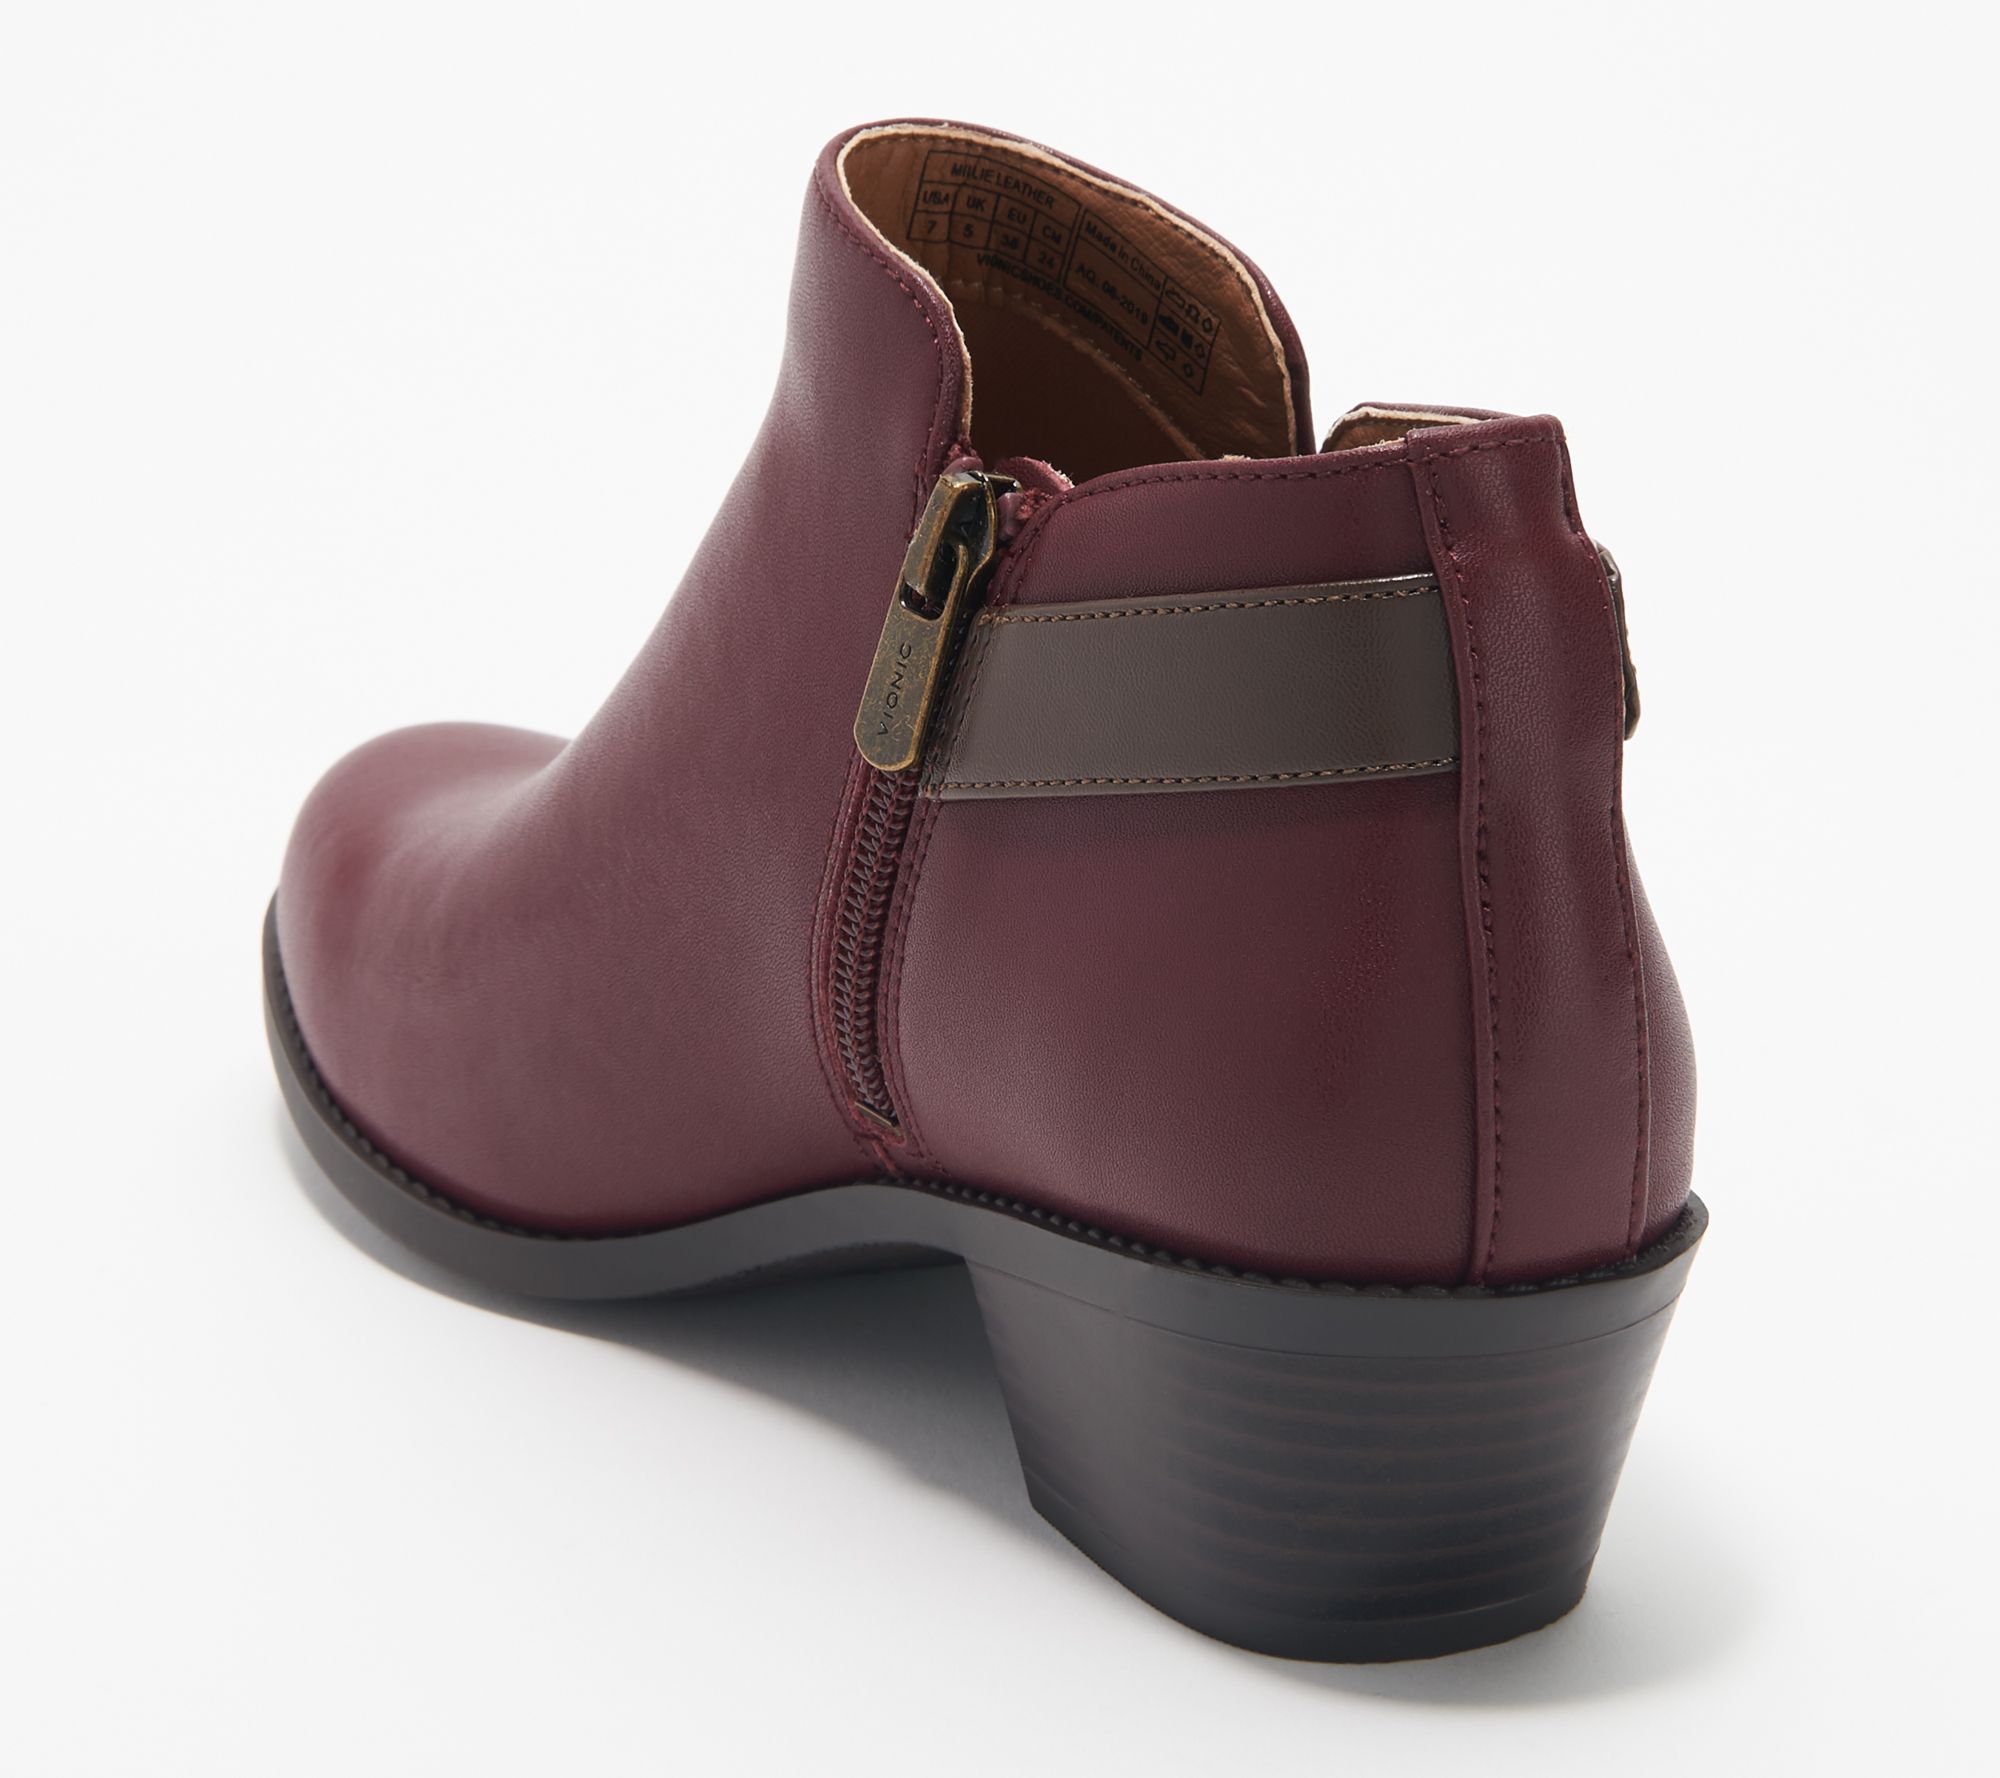 Vionic Ankle Boots with Buckle - Millie Millie - QVC.com